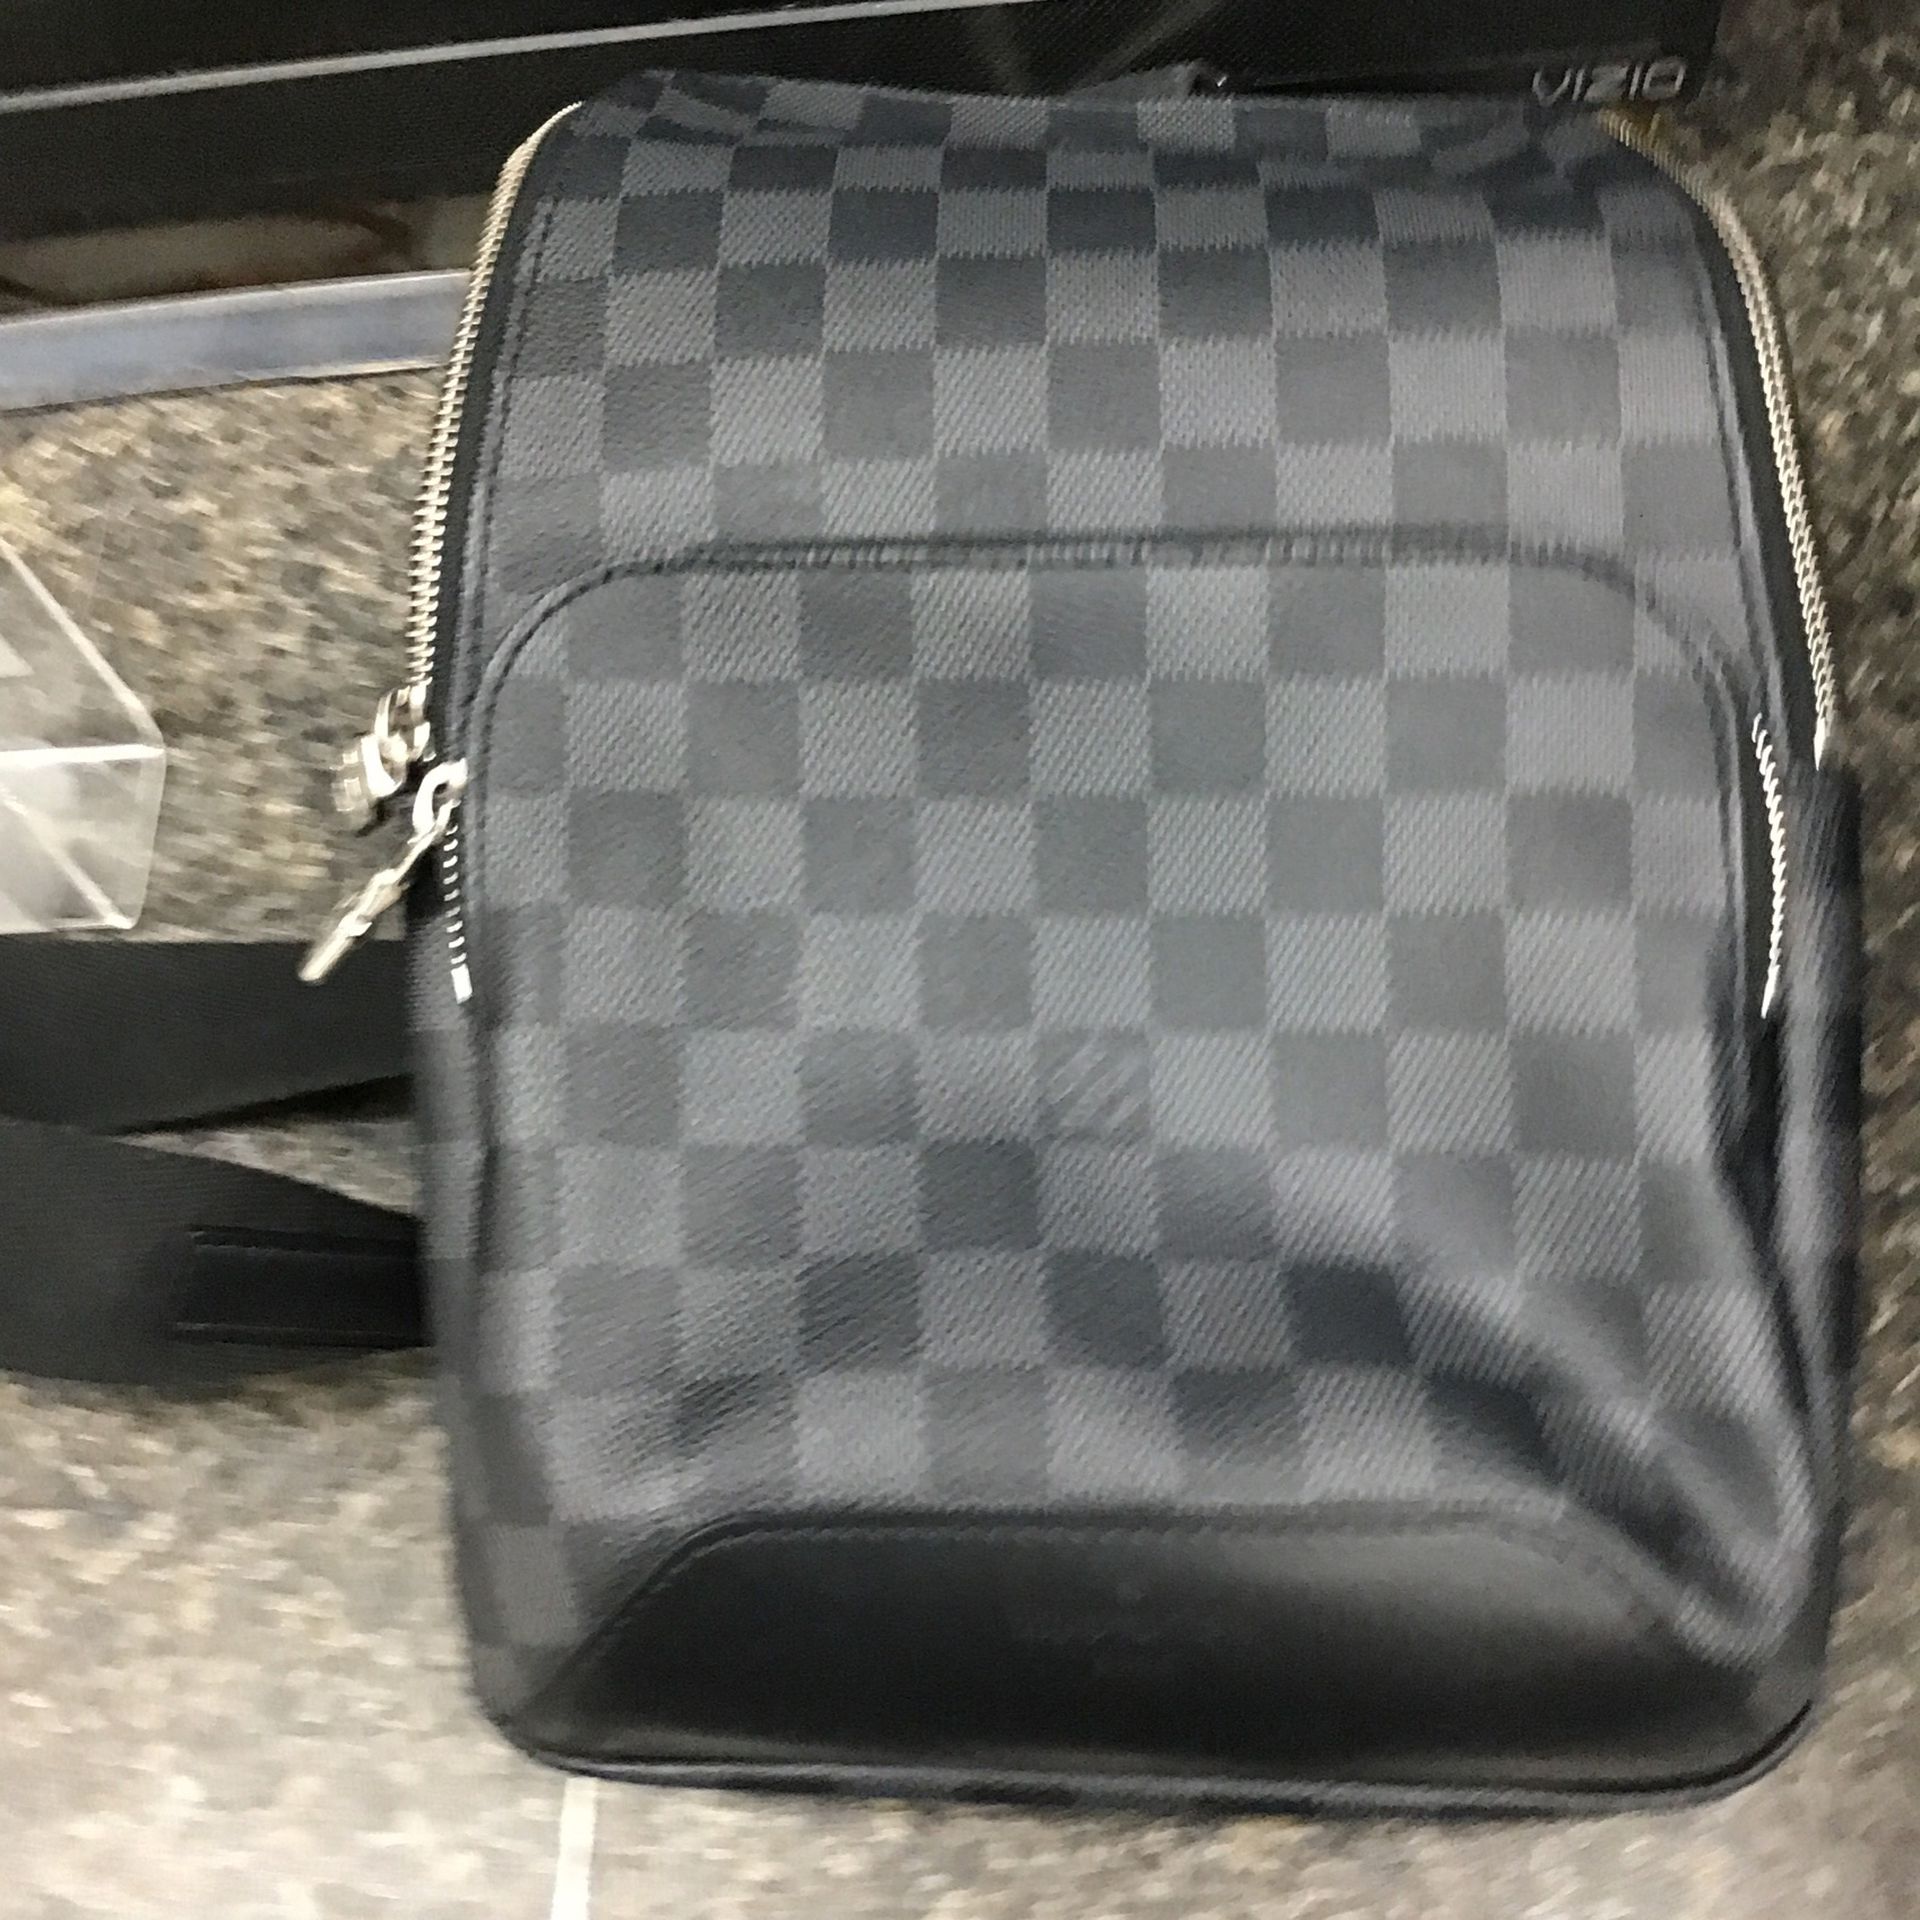 Rare lay used authentic LV purse. for Sale in Las Vegas, NV - OfferUp